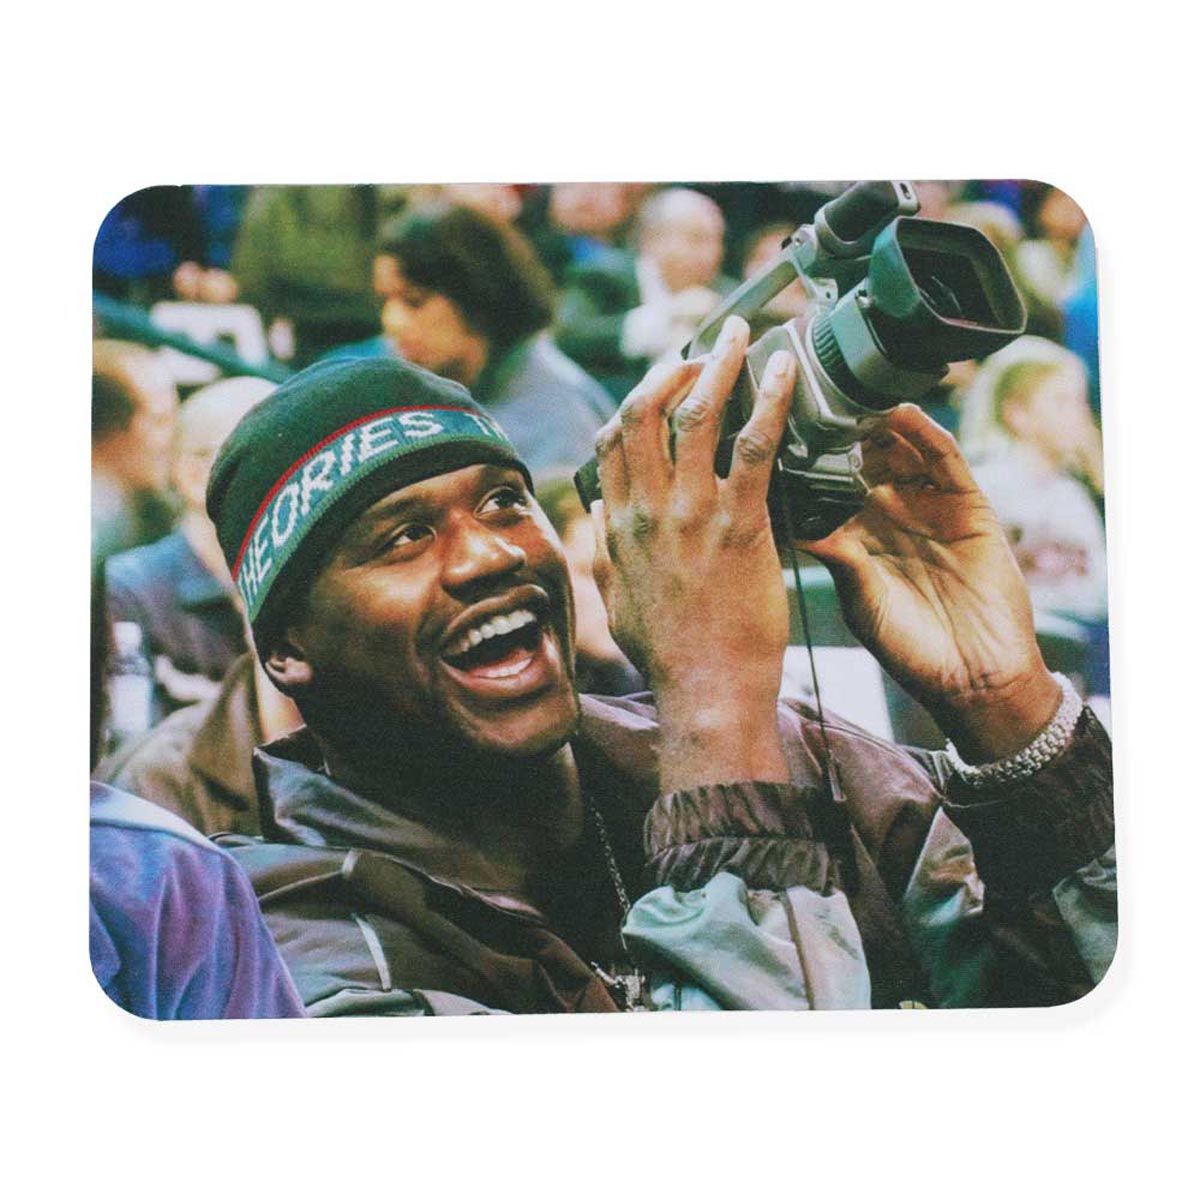 Theories Courtside Mousepad - Multi image 1